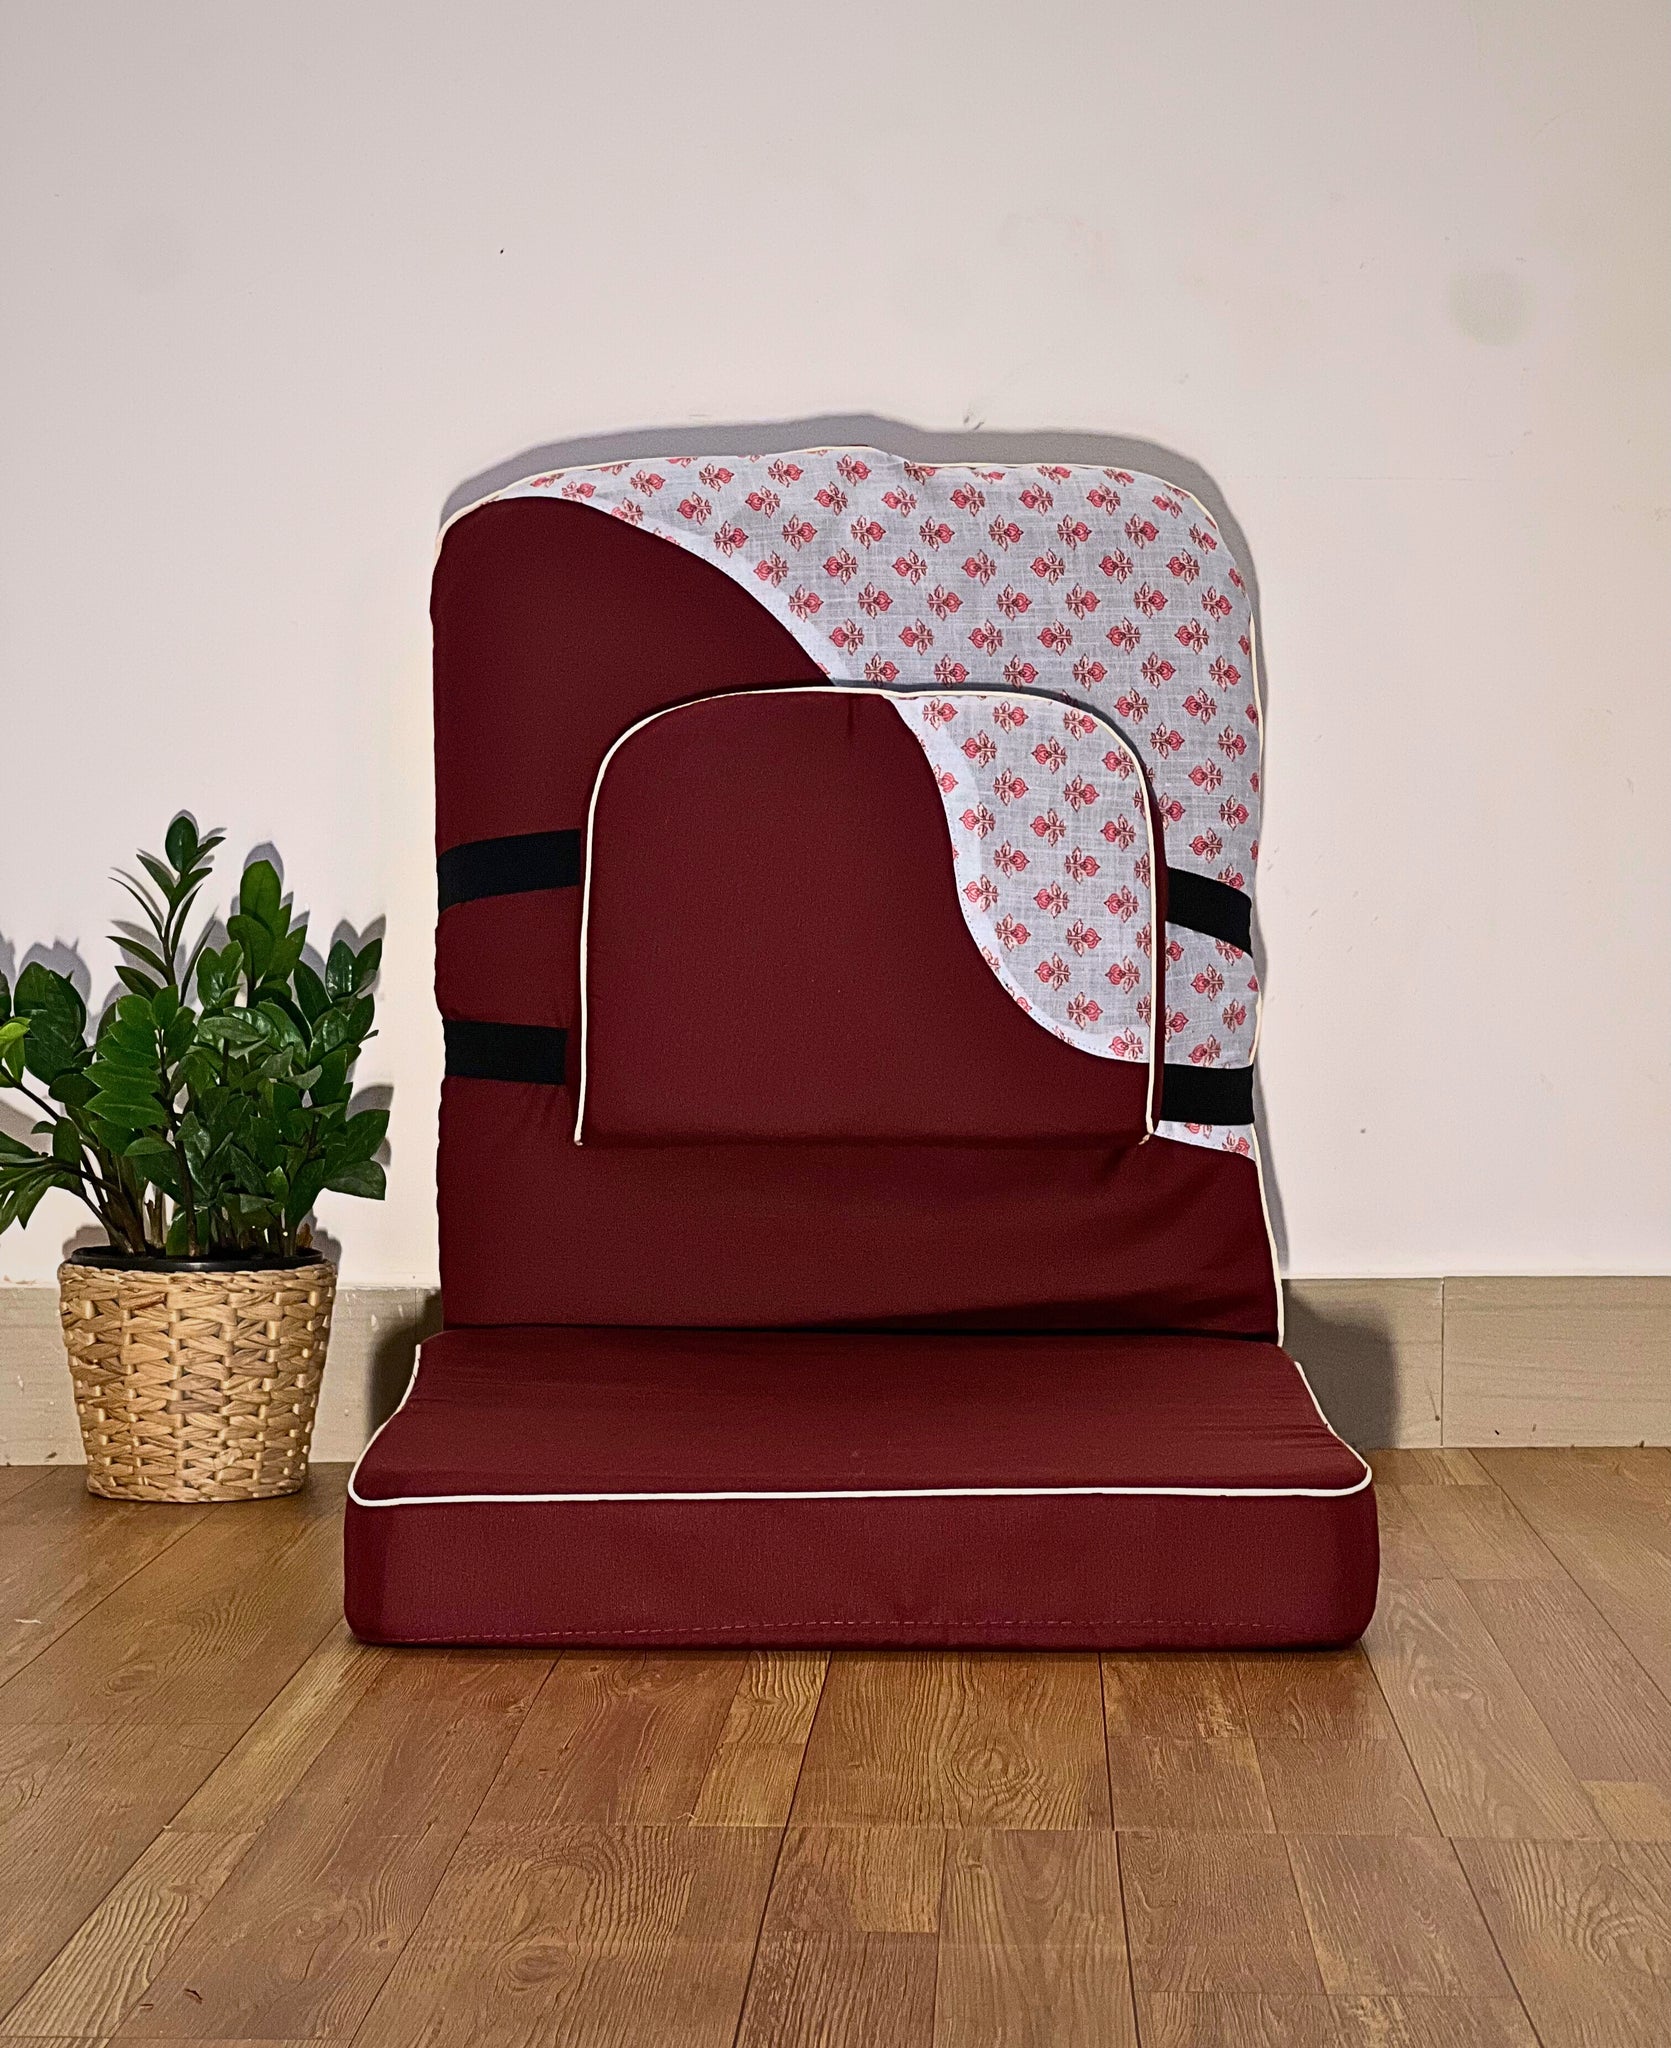 MEDITATION CHAIR WITH CUSHION FOLDABLE LIGHTWEIGHT PORTABLE BACK SUPPORT